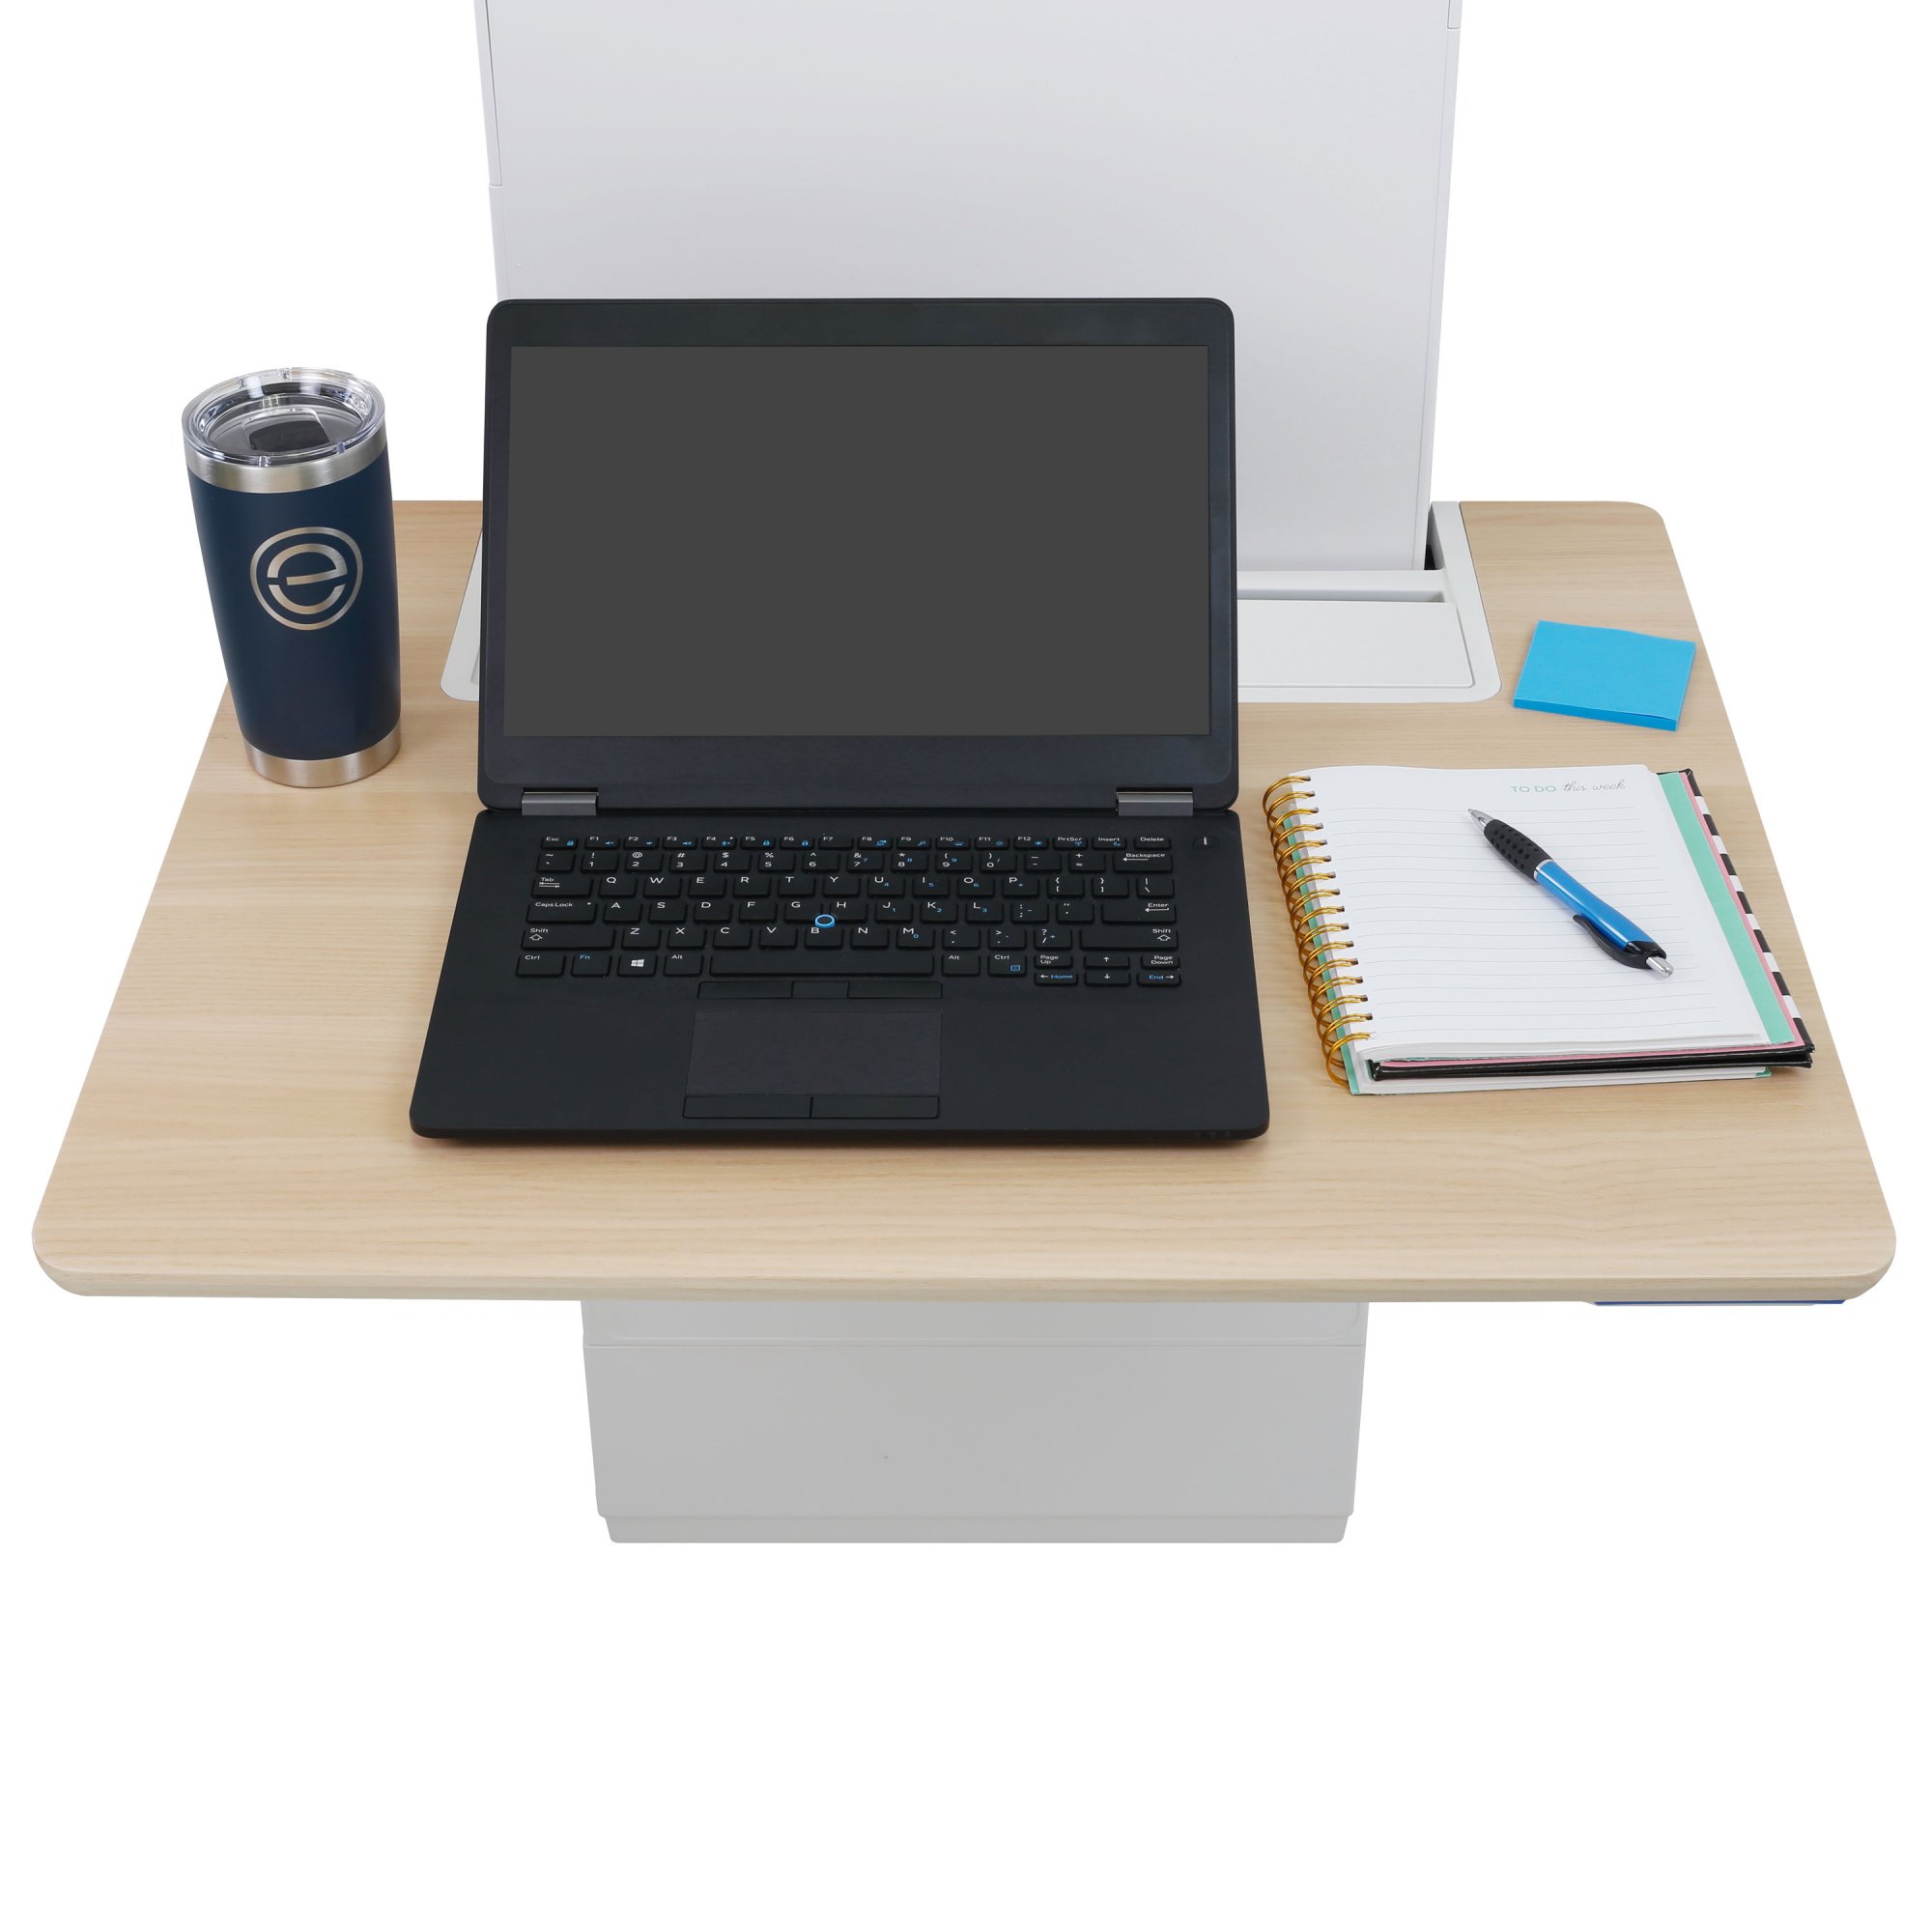 The worksurface easily adjusts 26" to comfortably work or collaborate while you sit or stand